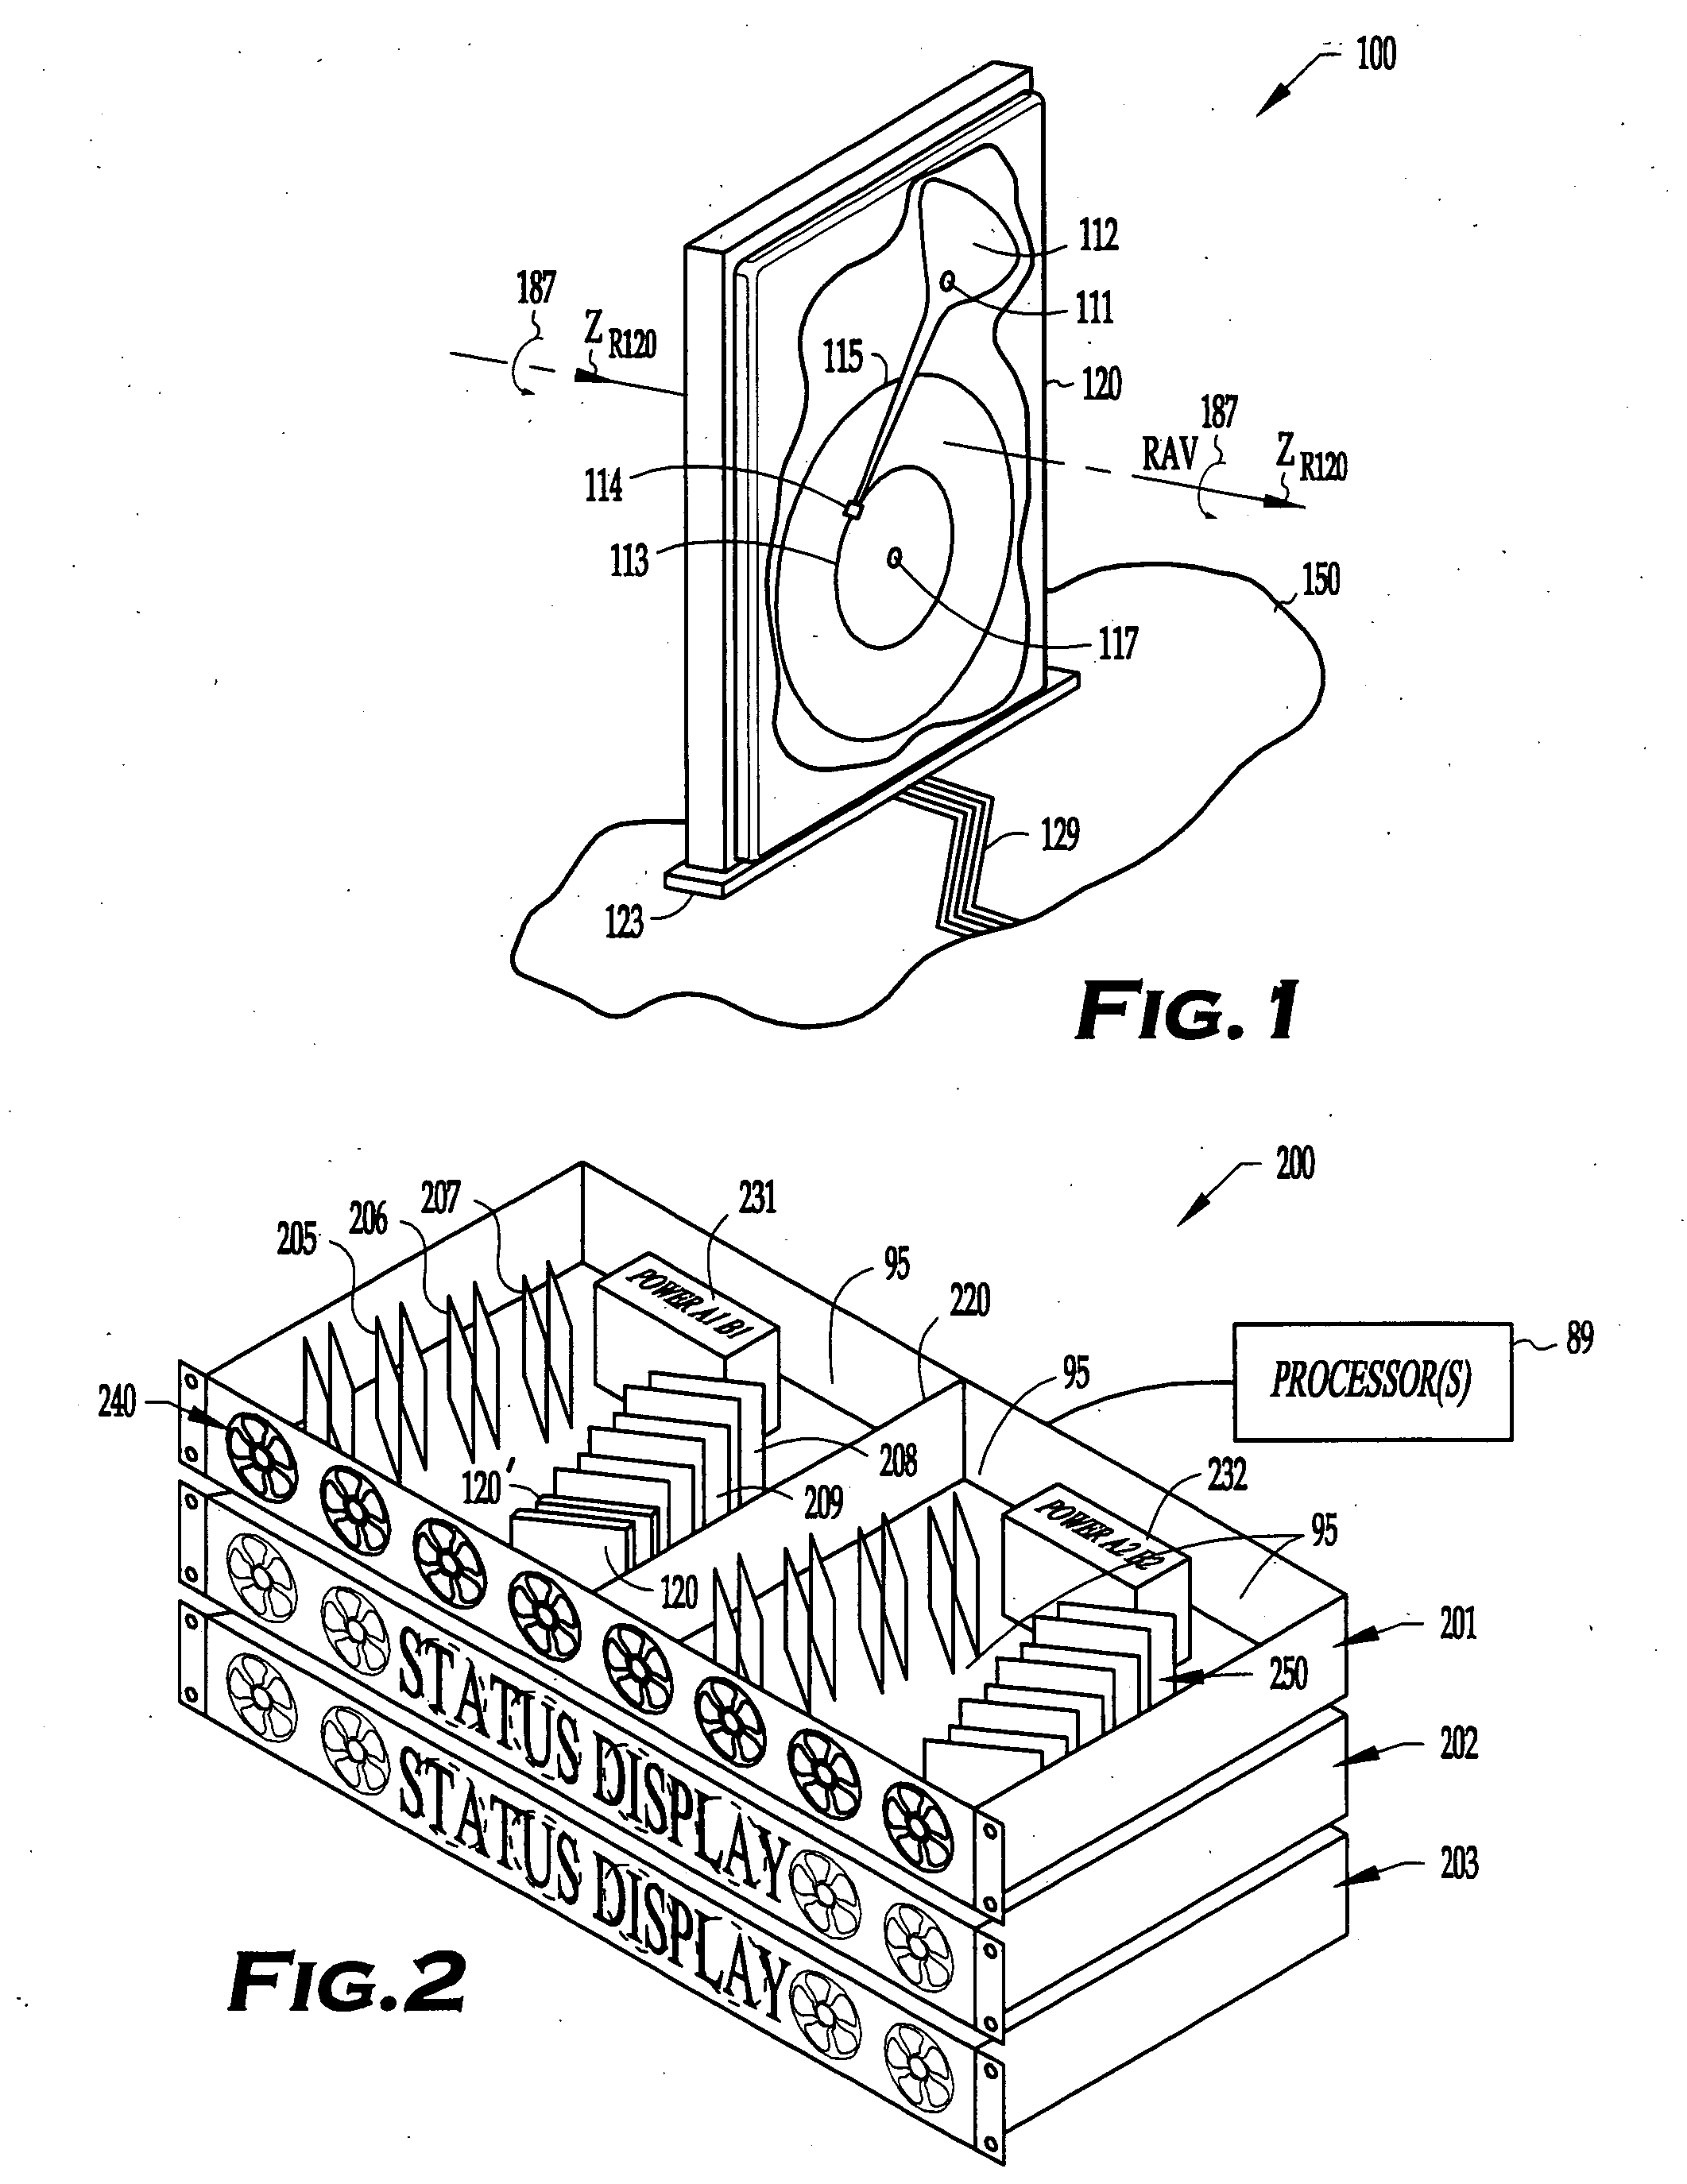 System and method for mass storage using multiple-hard-disk-drive enclosure